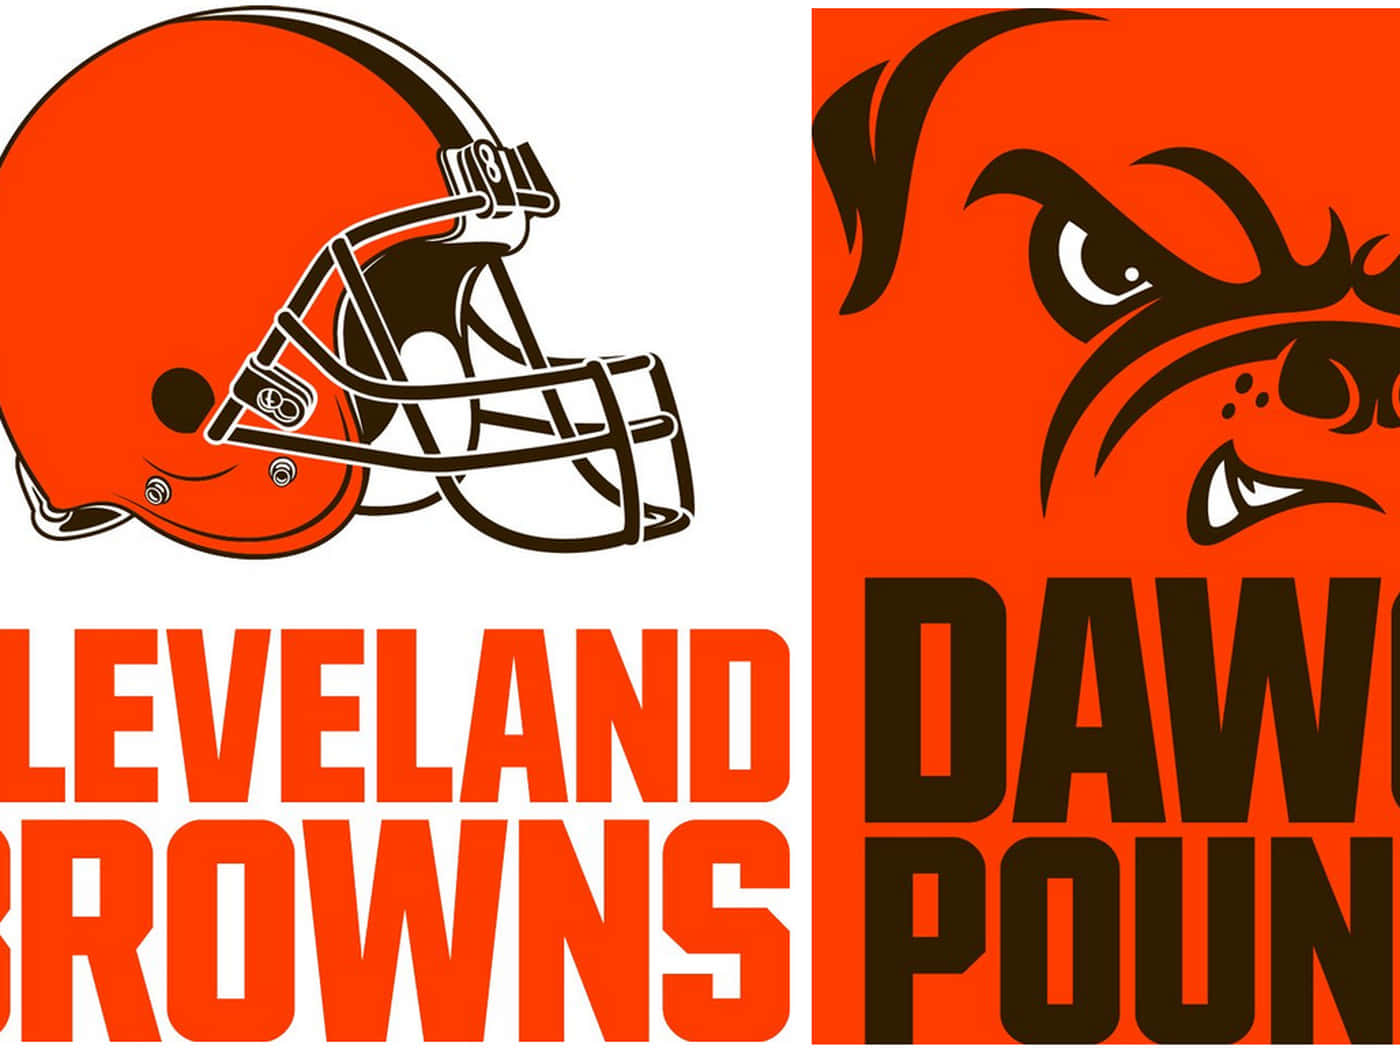 The Cleveland Browns Logo Wallpaper